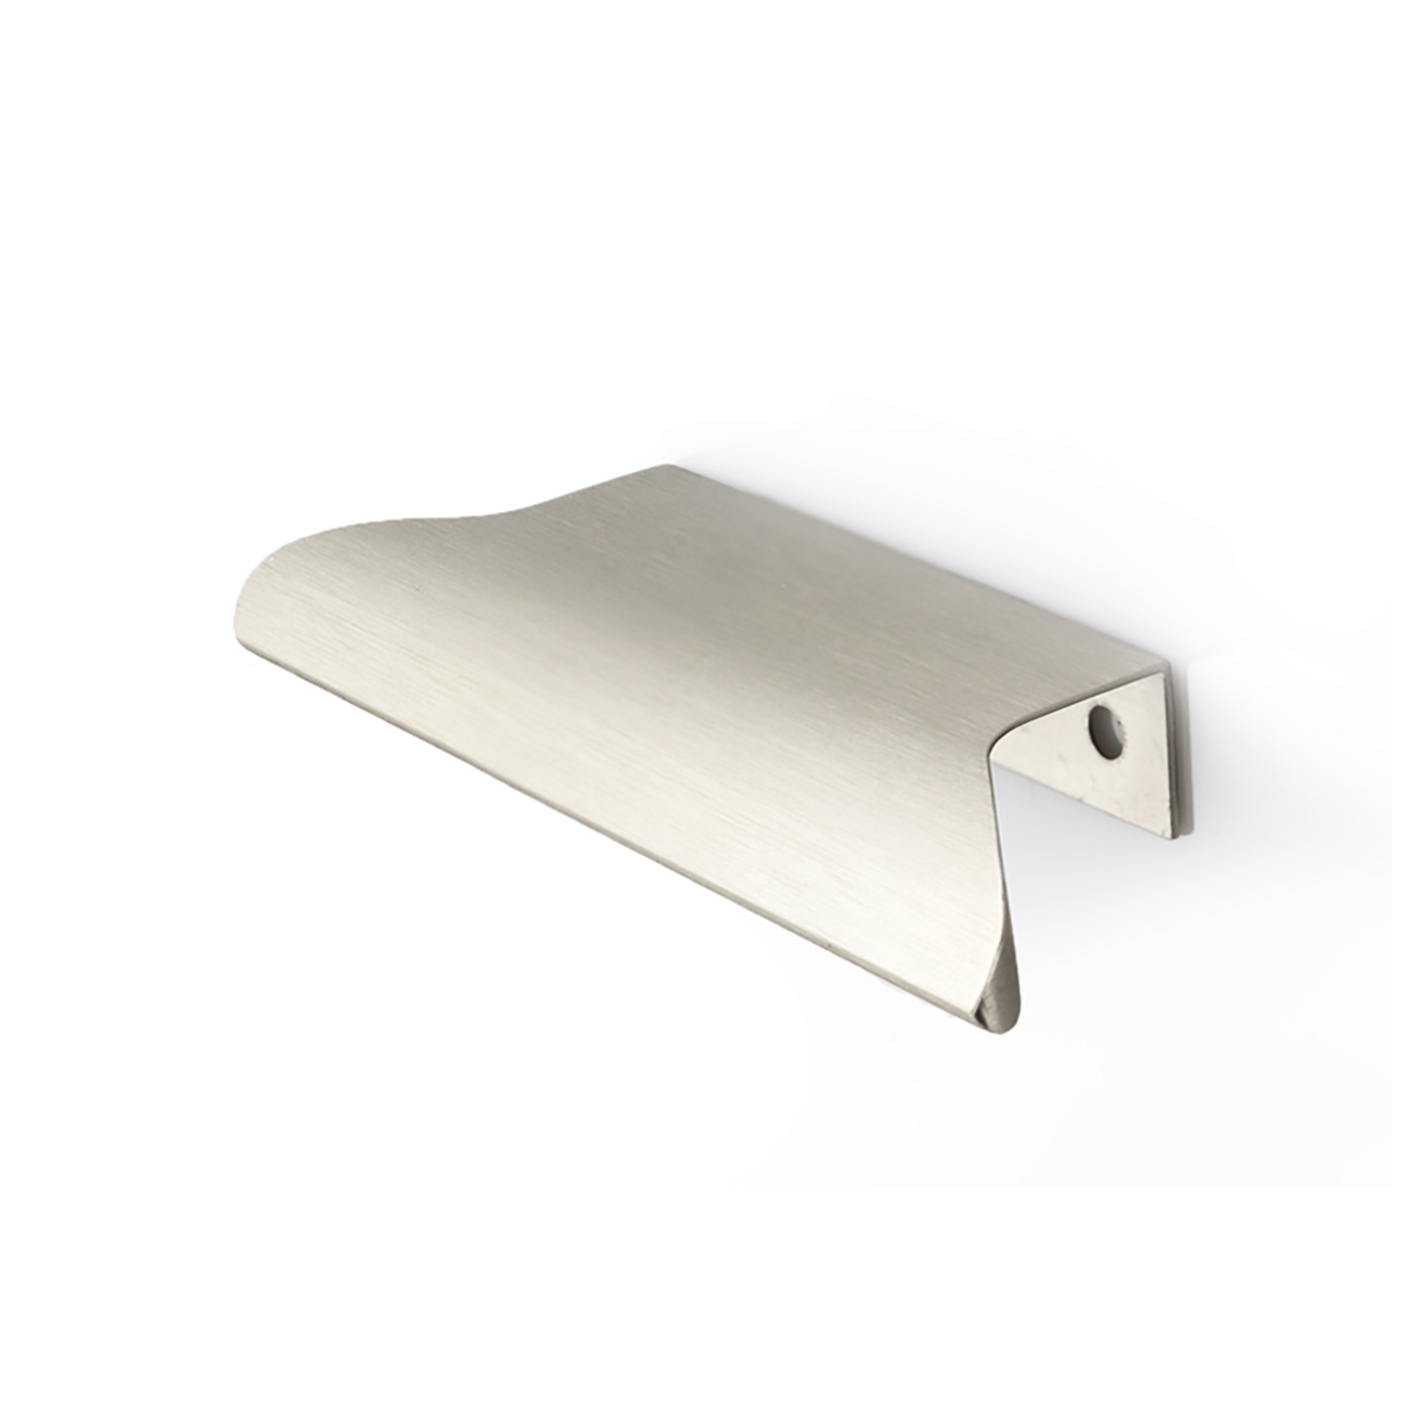 Ritta Edge Pull, 64mm, Brushed Stainless Steel